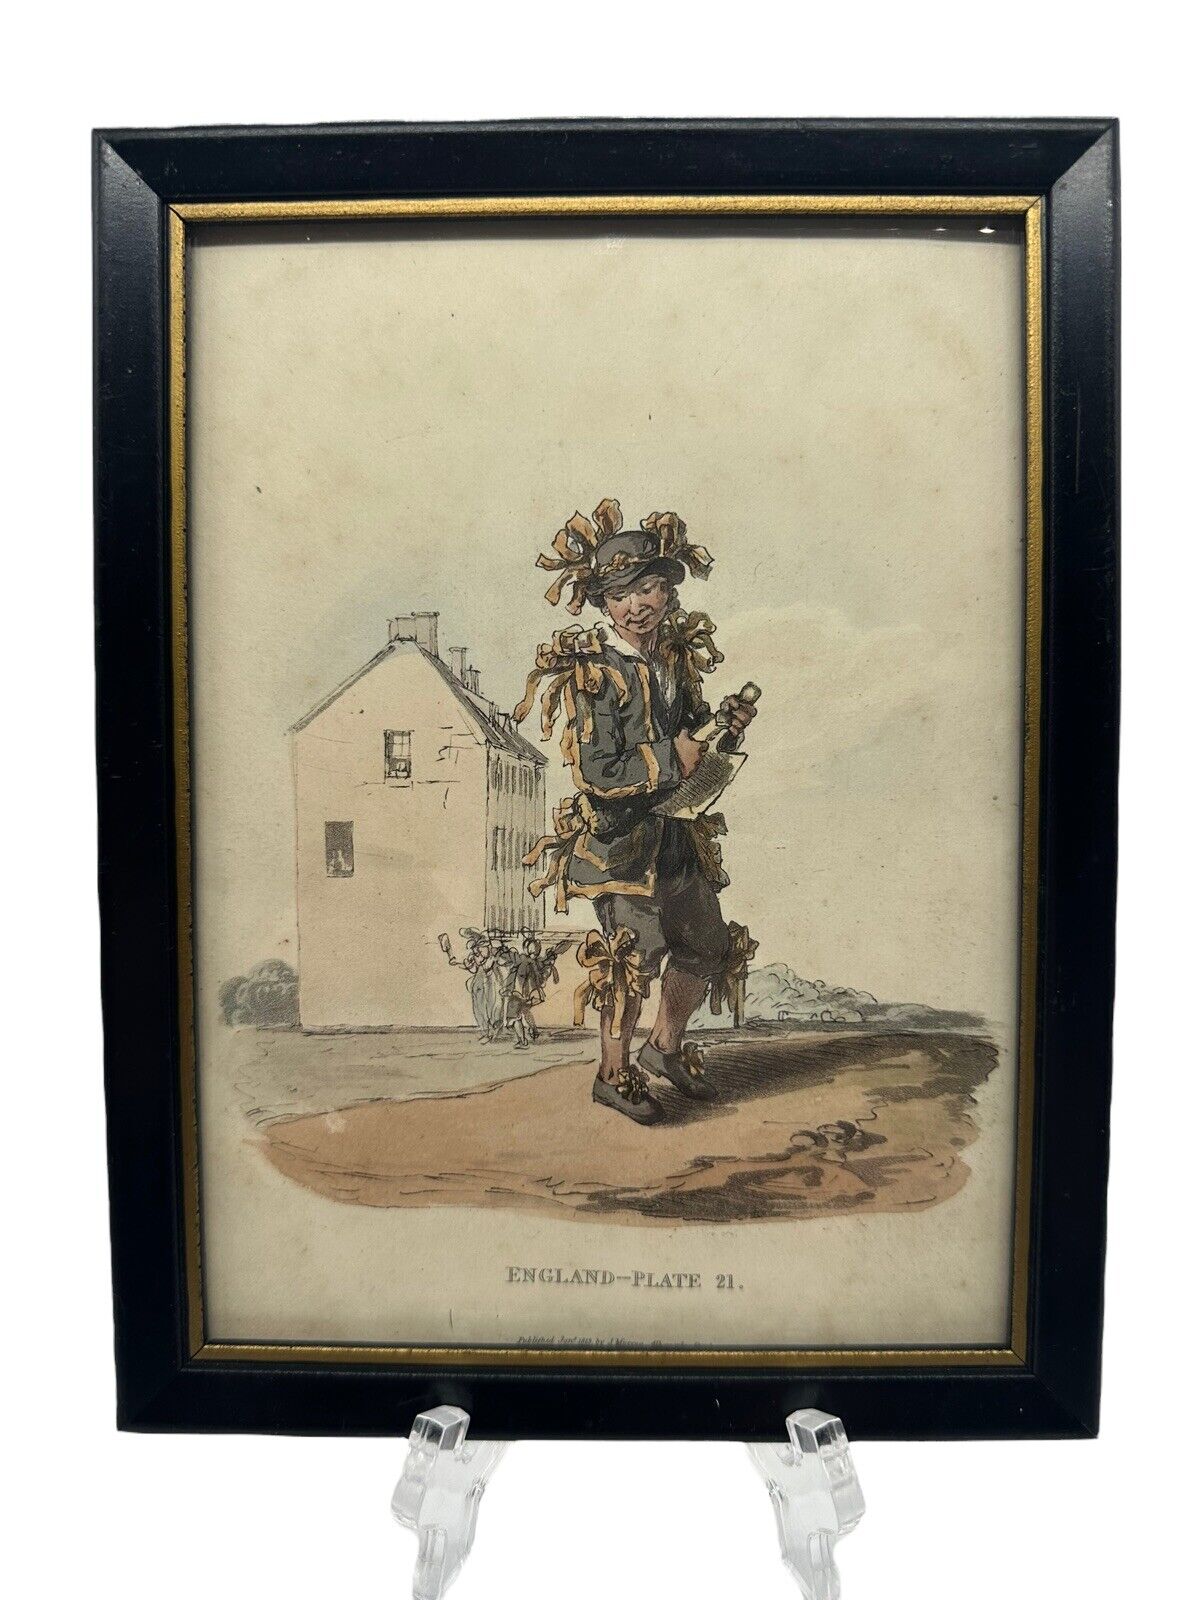 Vintage John Murray Chimney-Sweeper on the First of May Plate 21 Framed 1813